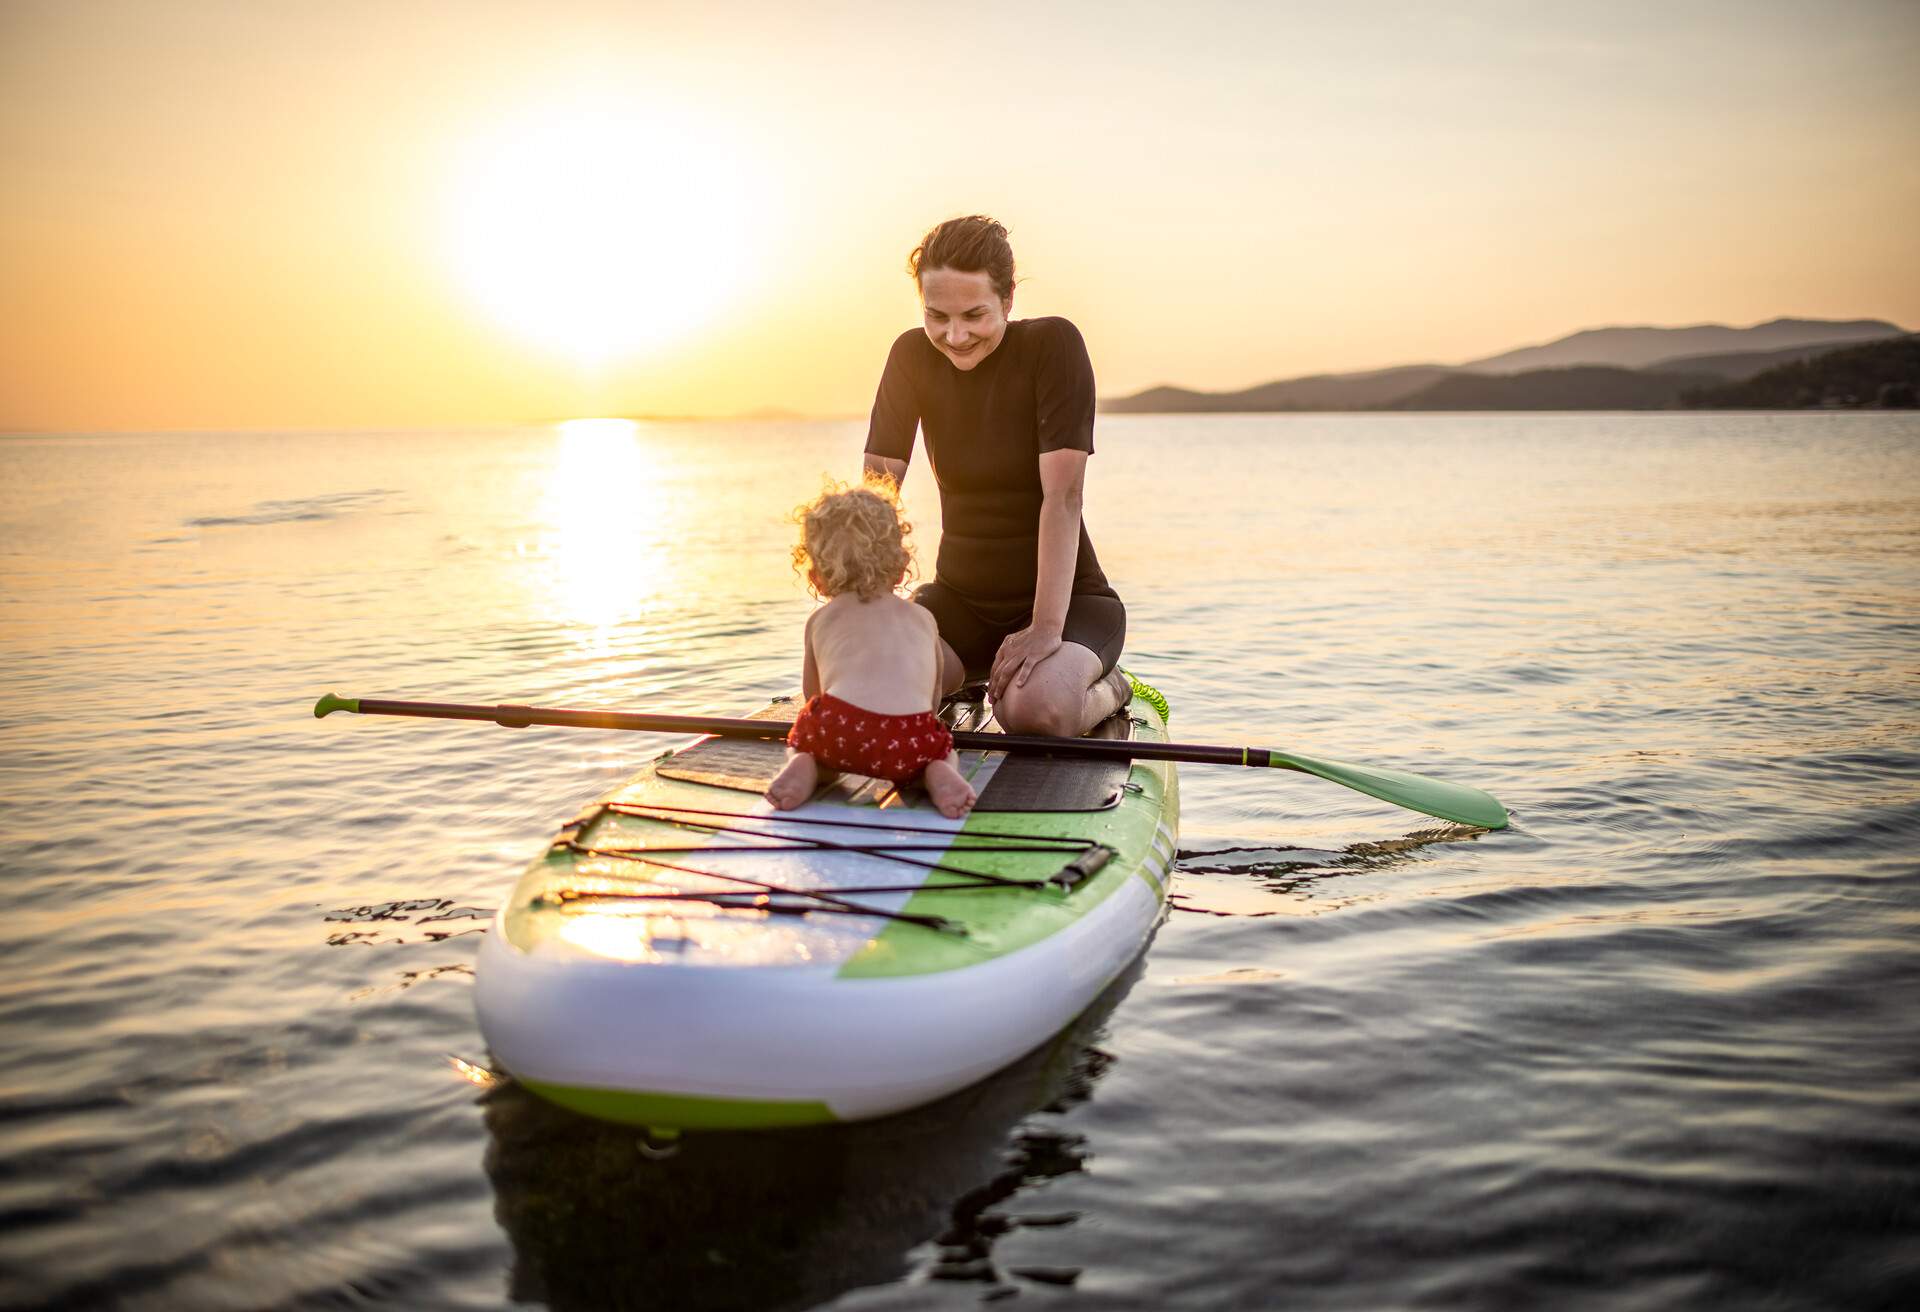 Photo of surfing mum and son enjoys on a paddle board in the sea